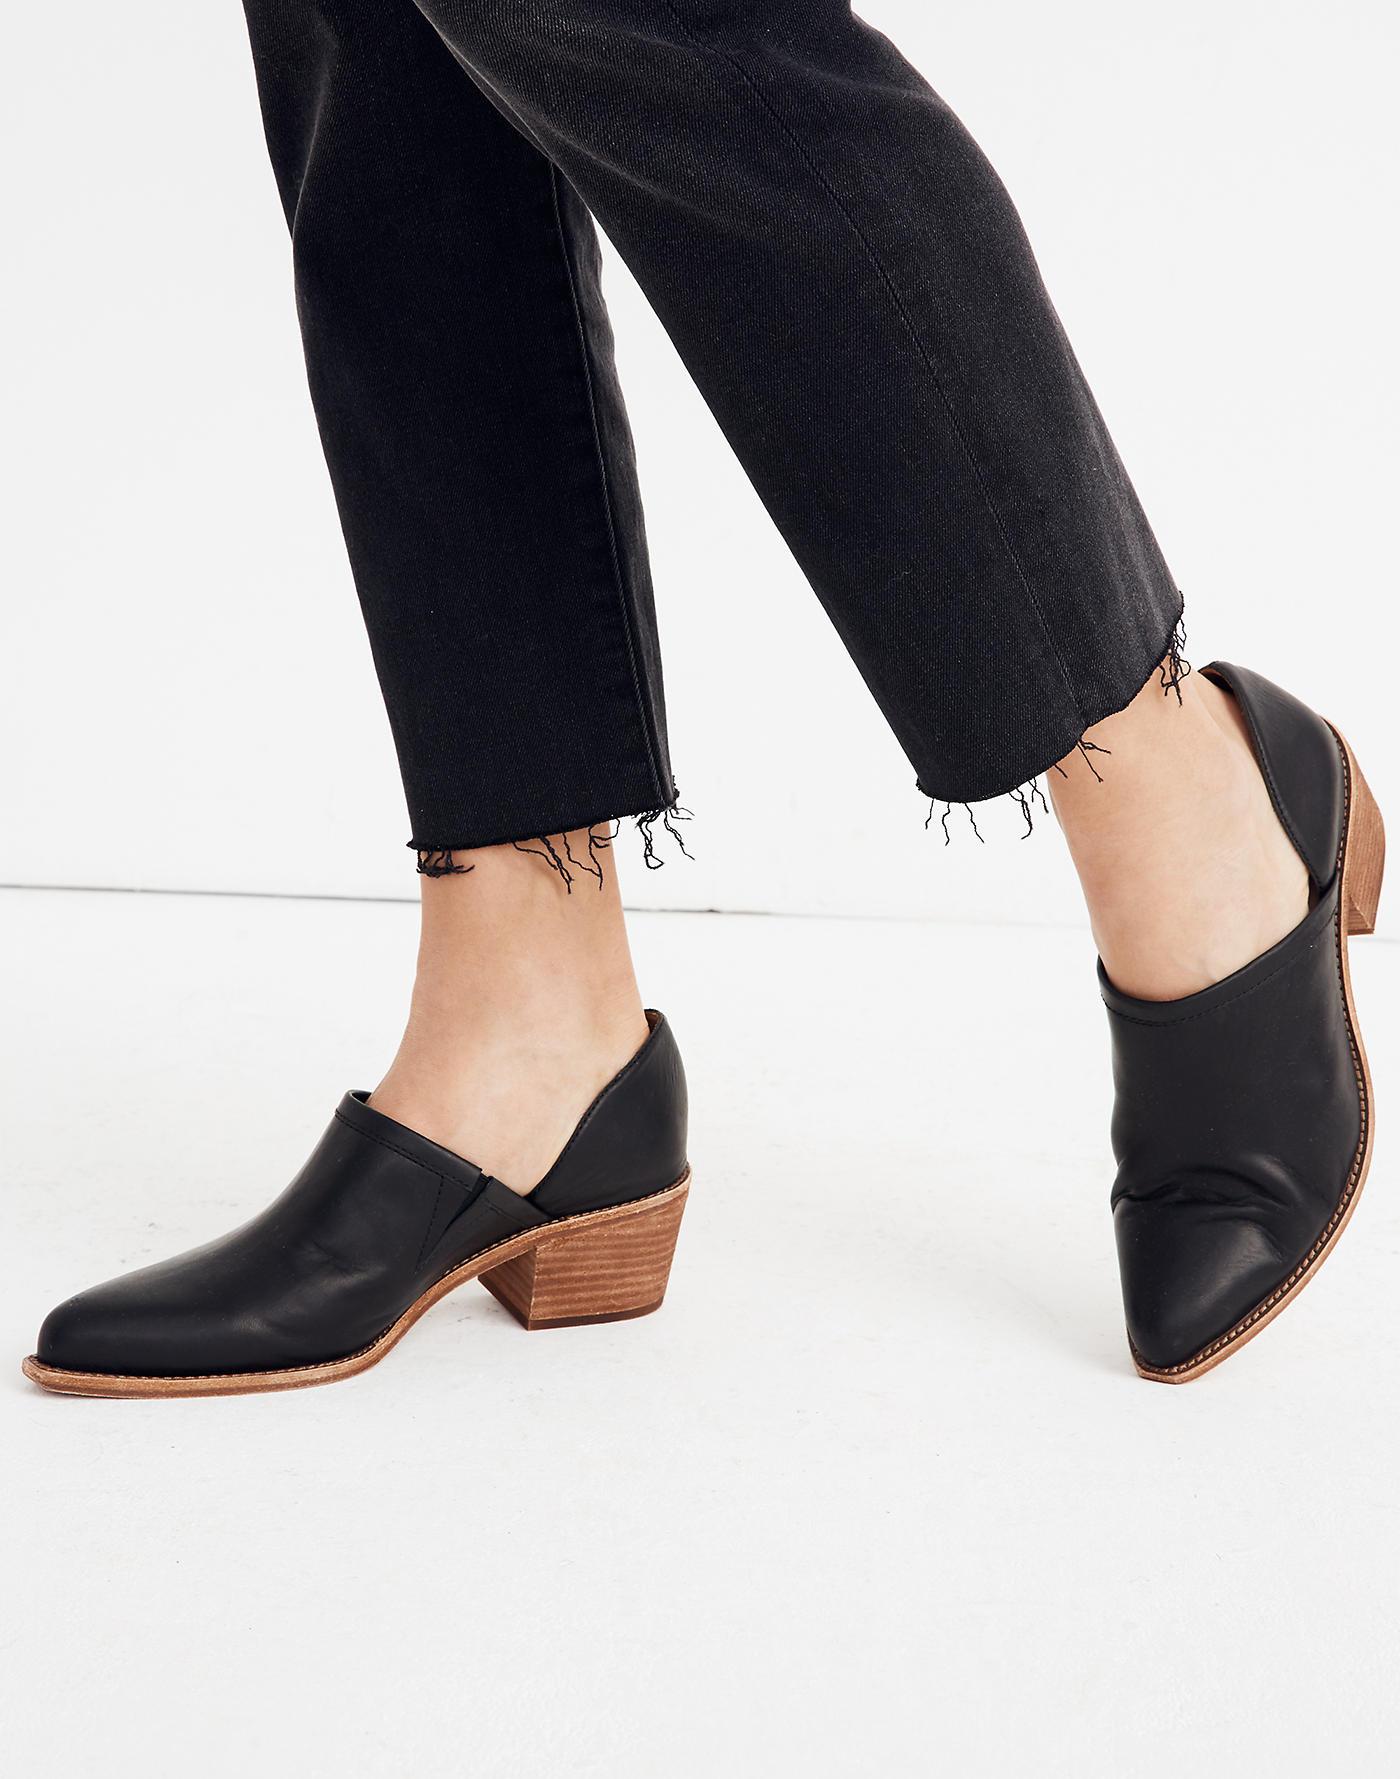 Madewell Leather The Brady Lowcut Bootie in Black - Lyst